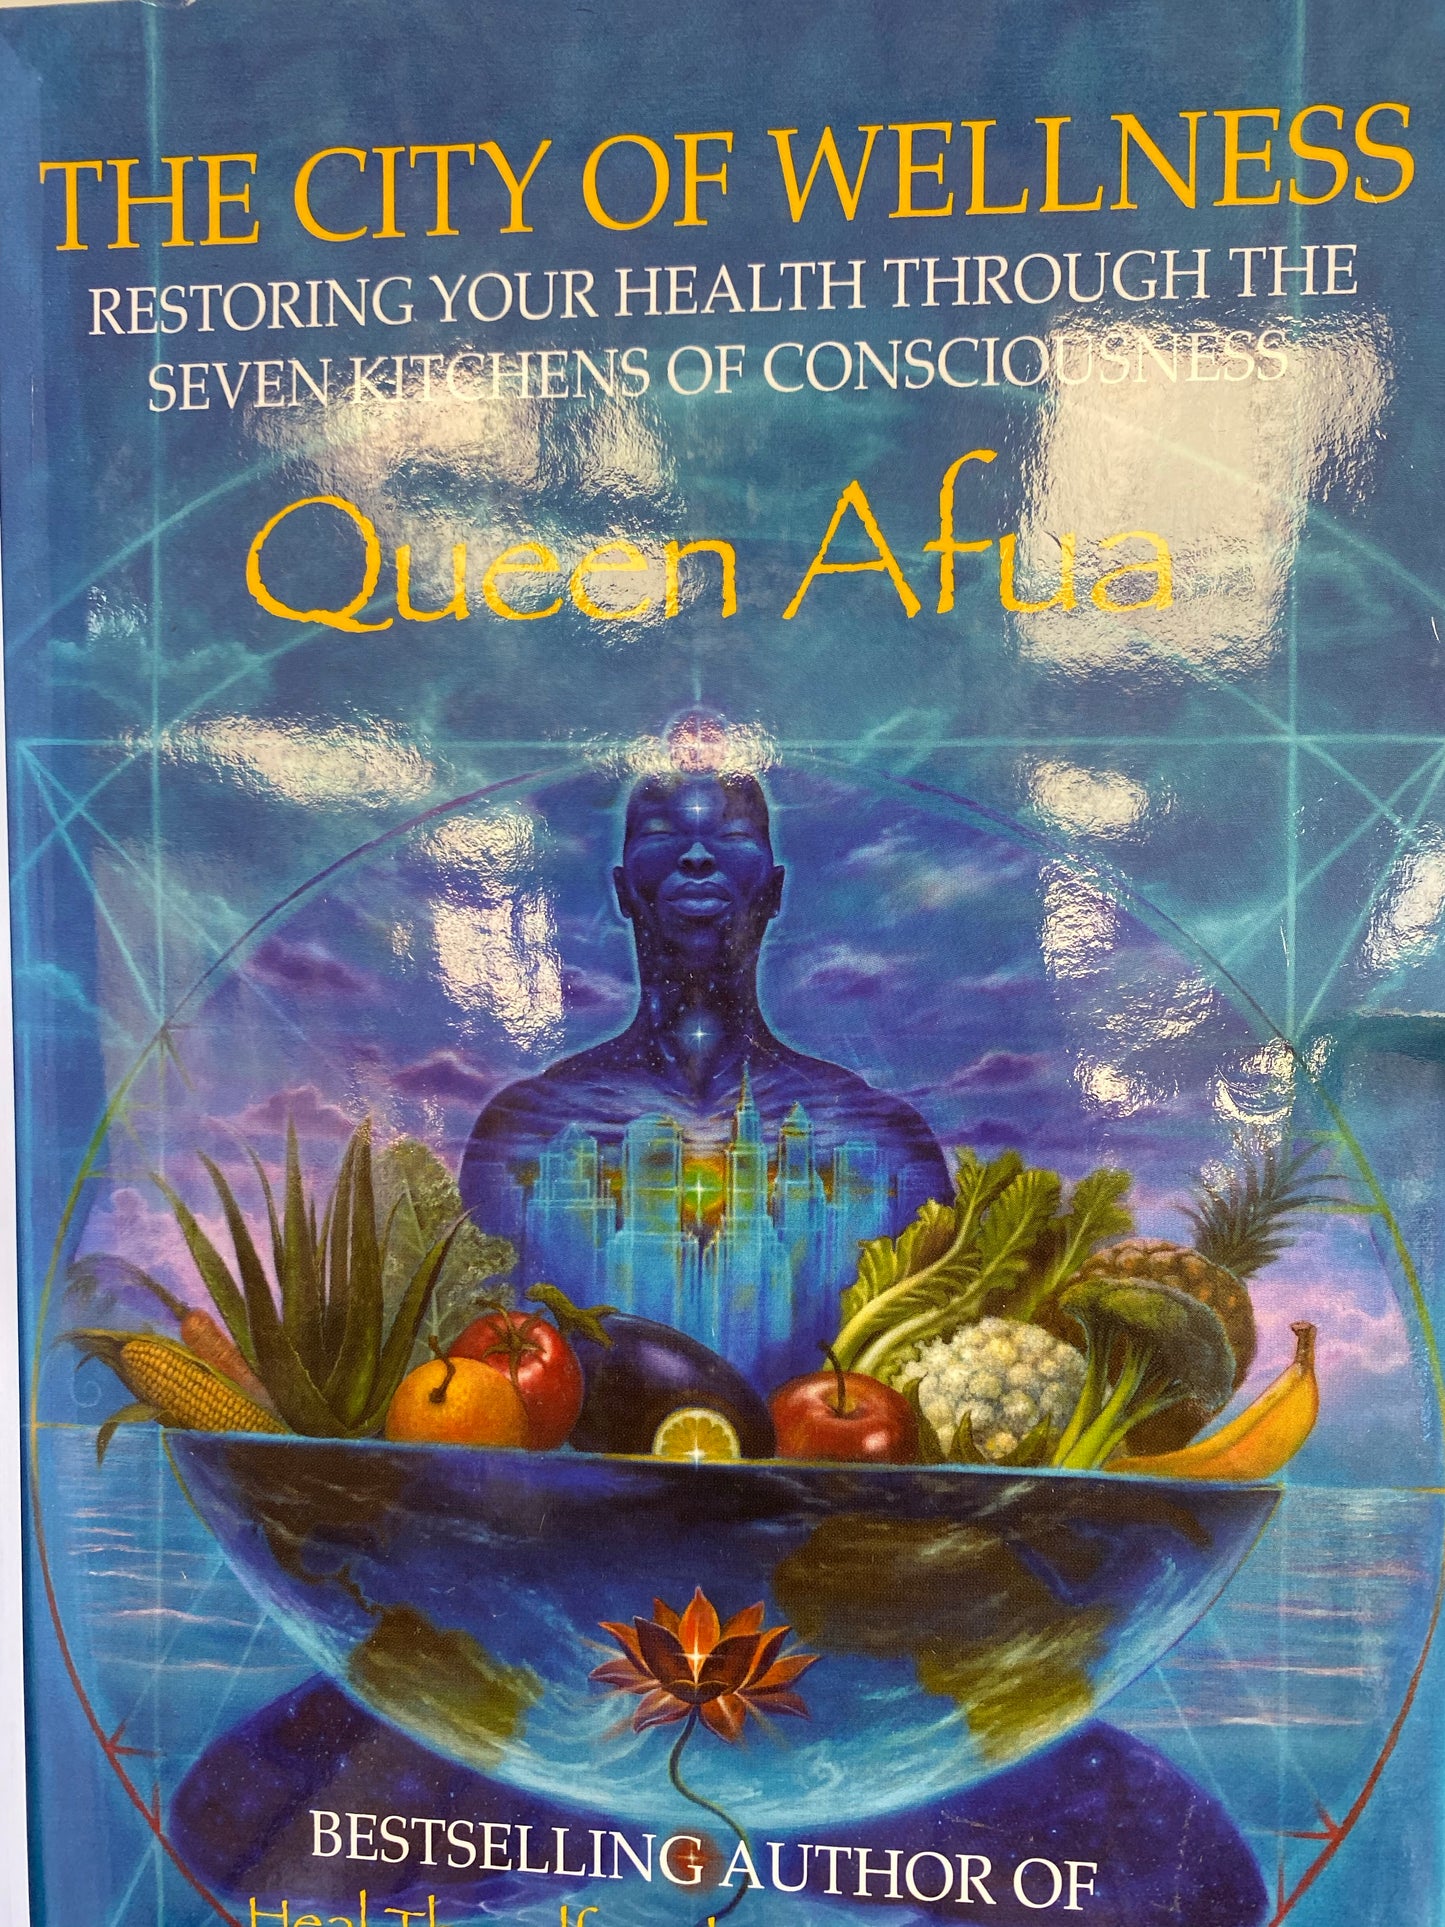 The city of wellness restoring your health through the seven kitchens of consciousness